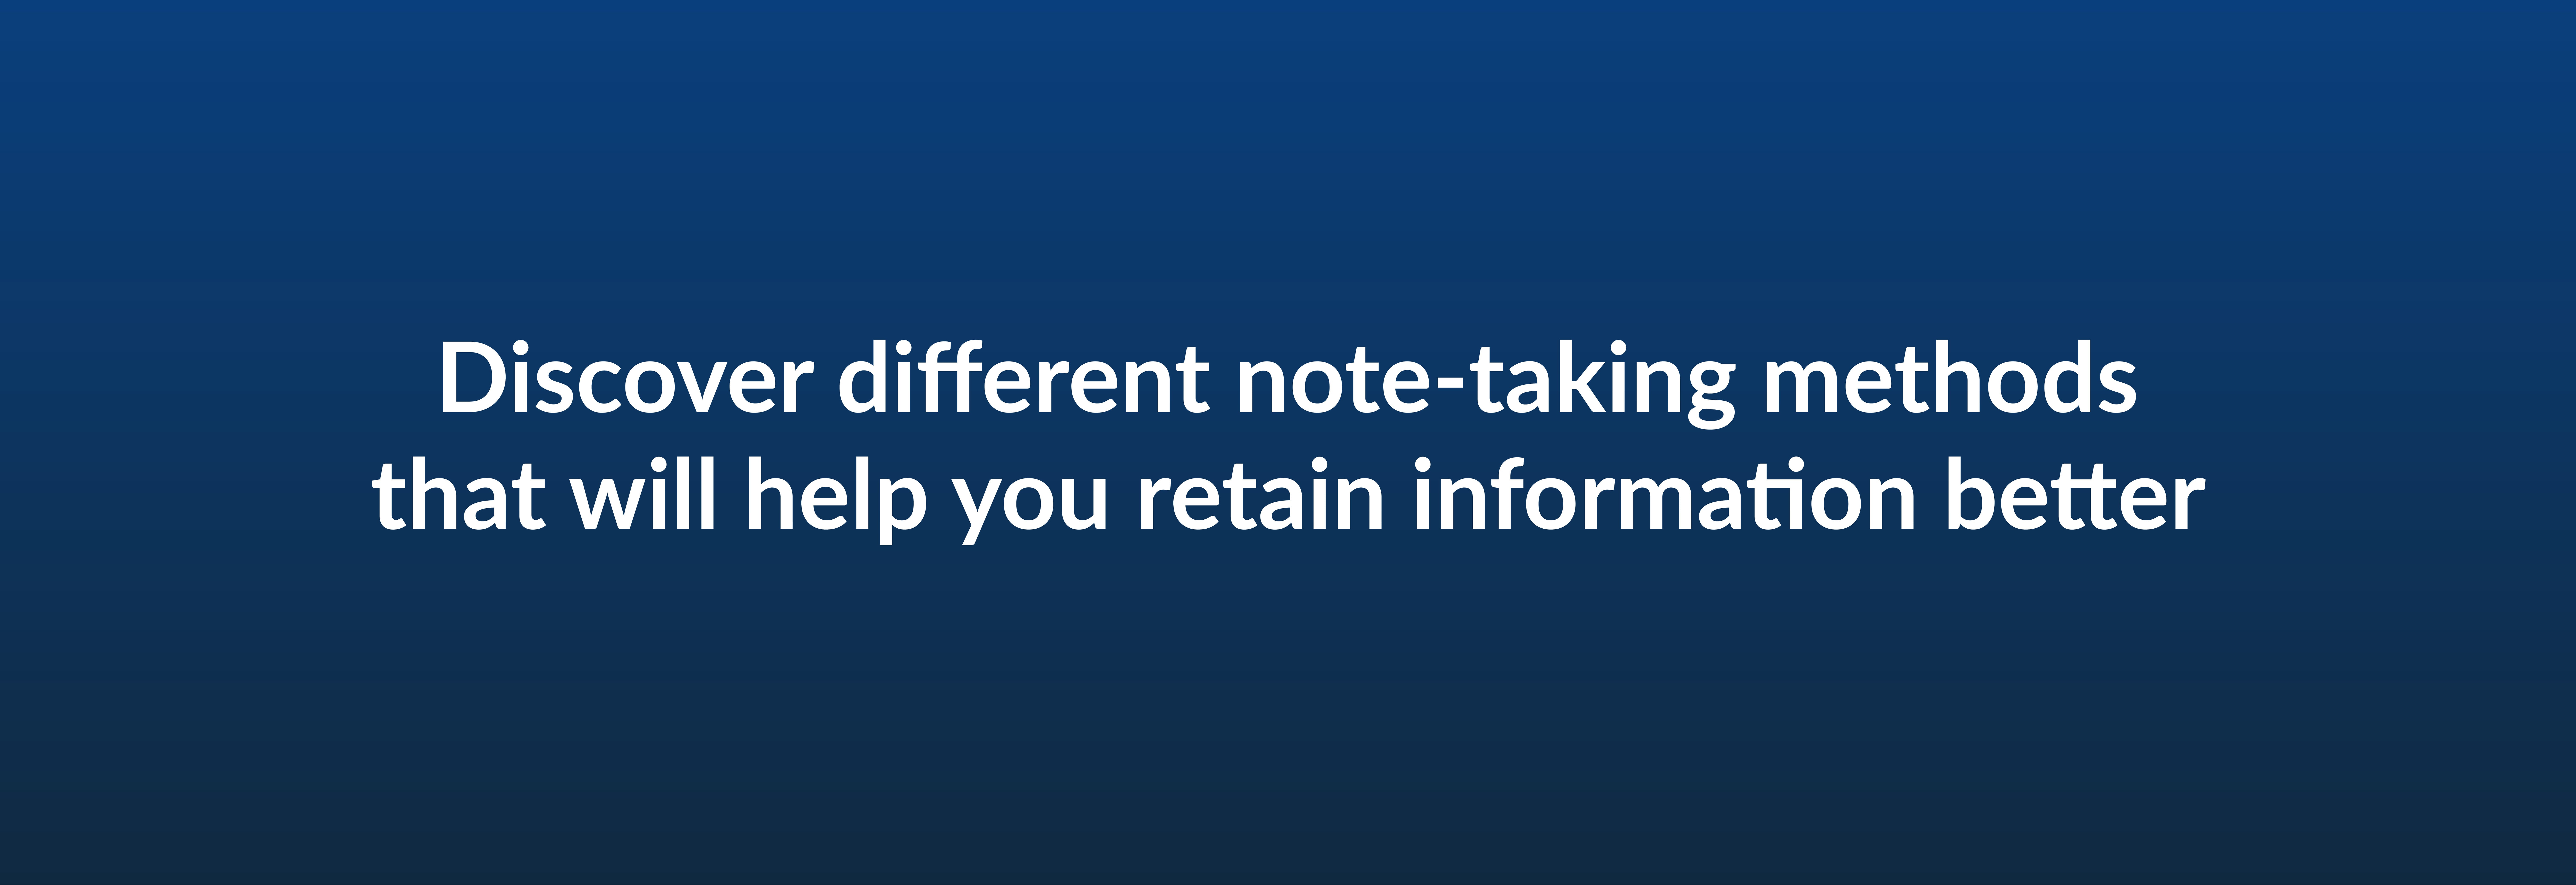 Discover different note-taking methods that will help you retain information better